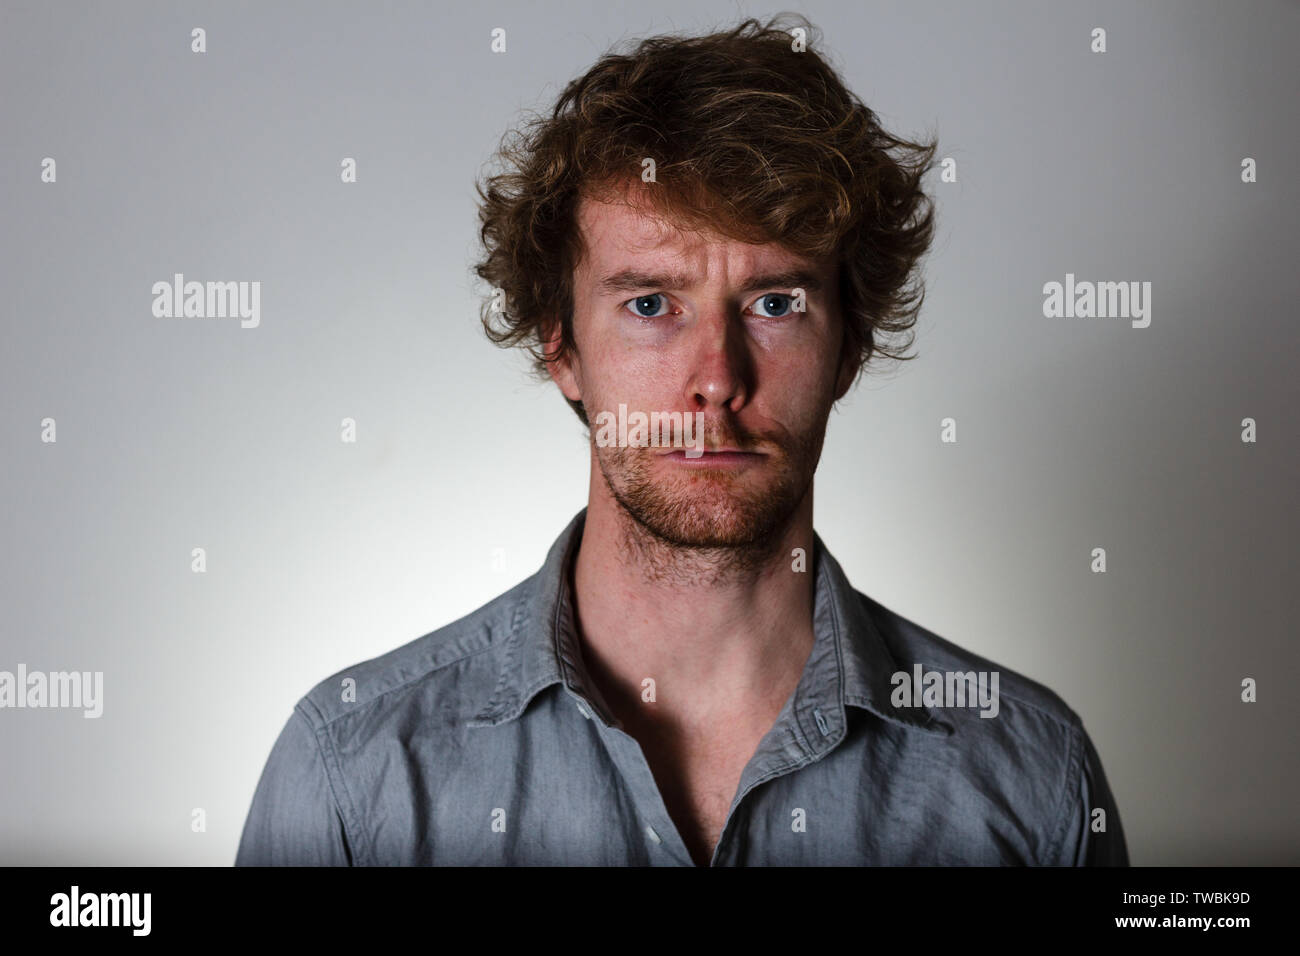 Weird expression young man on gray background Stock Photo